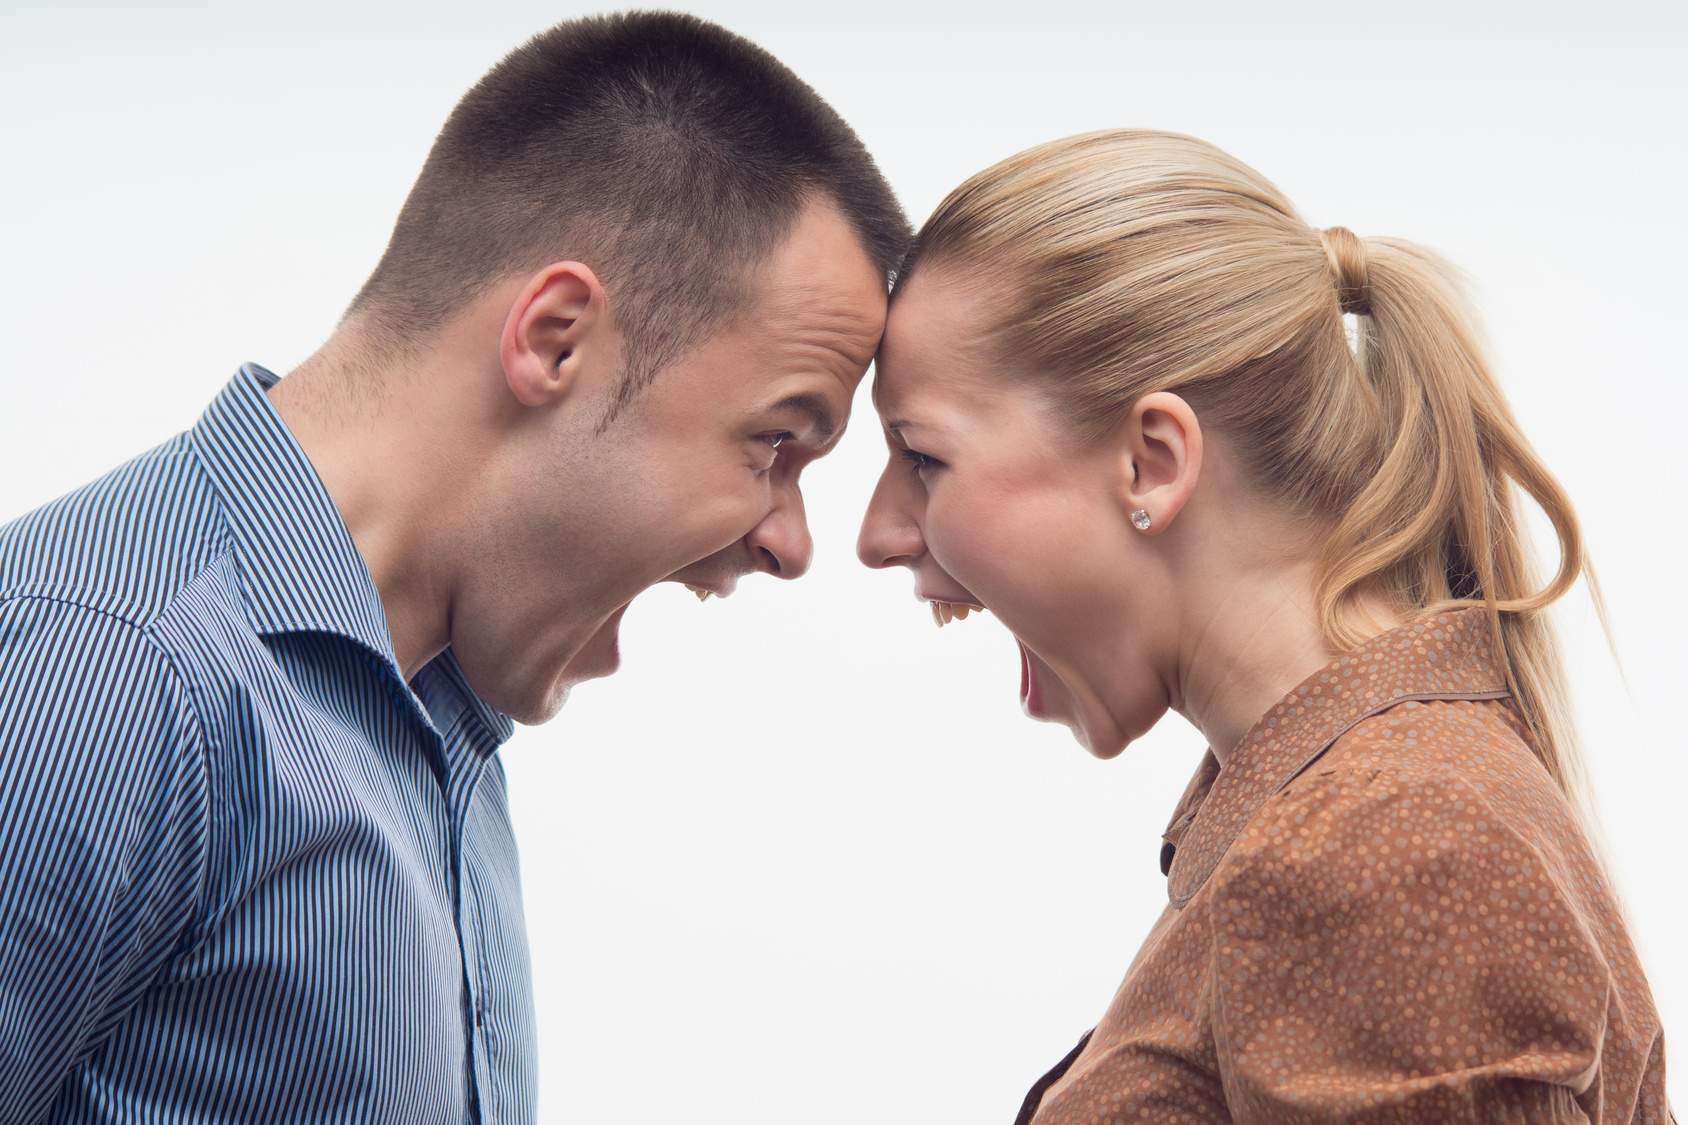 Colleagues fighting each other with foreheads together, staring with hostile expressions isolated on white